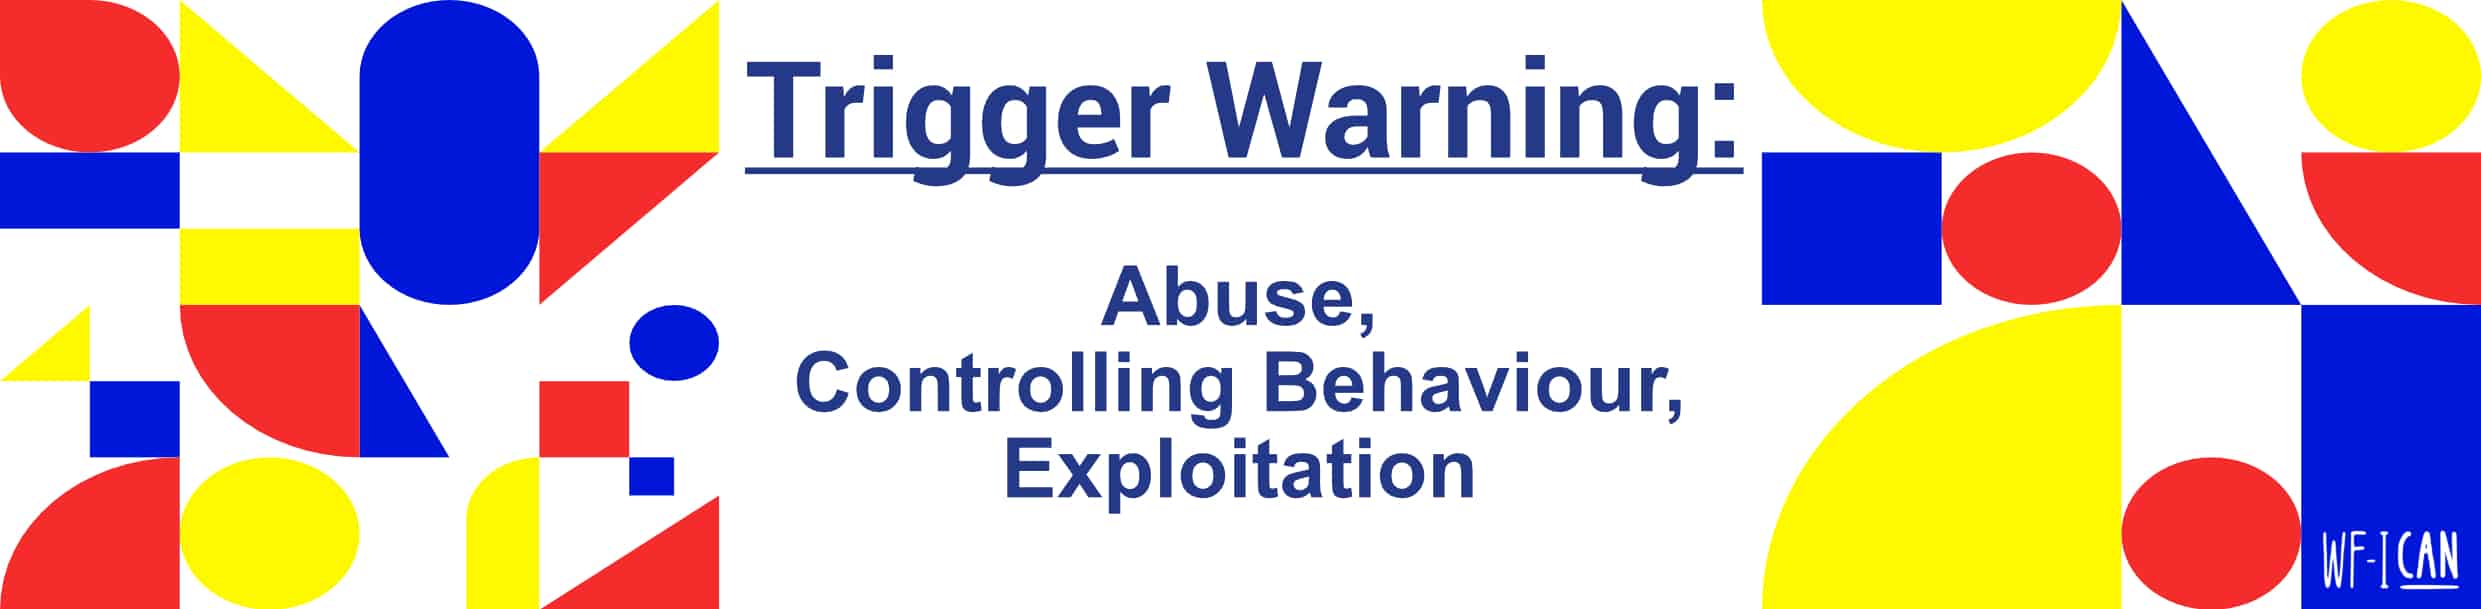 wfican trigger warning abuse, controlling behaviour, exploitation